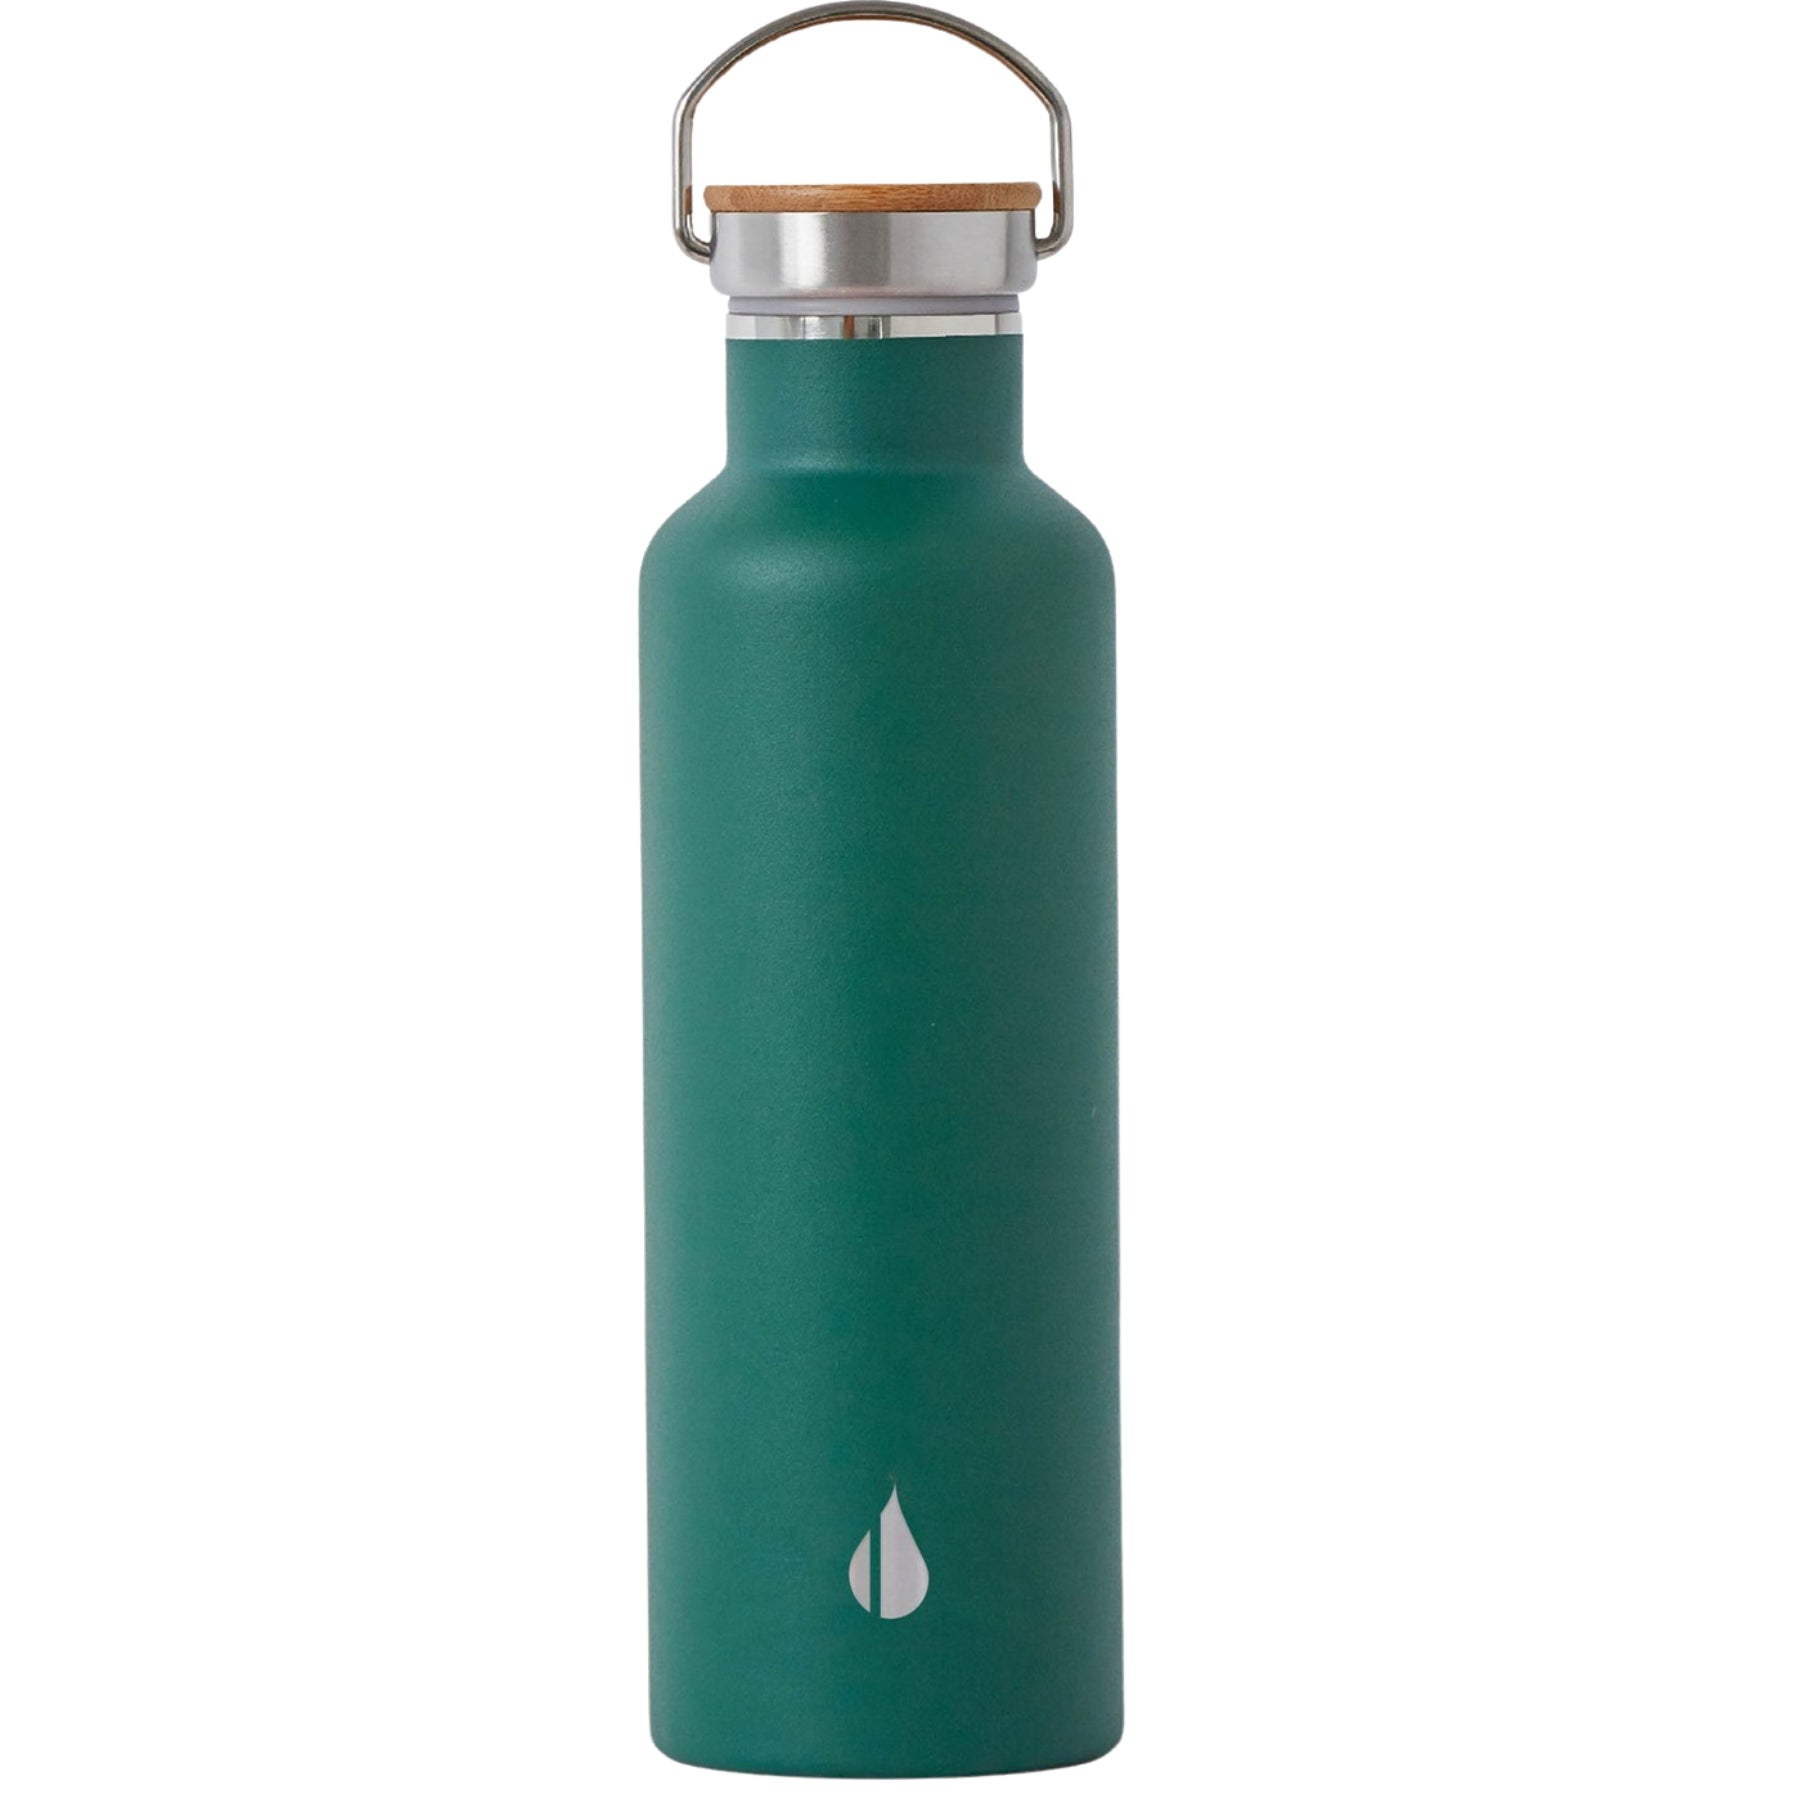 Customizable Elemental® 25 oz Stainless Steel Insulated Bottle in forest green